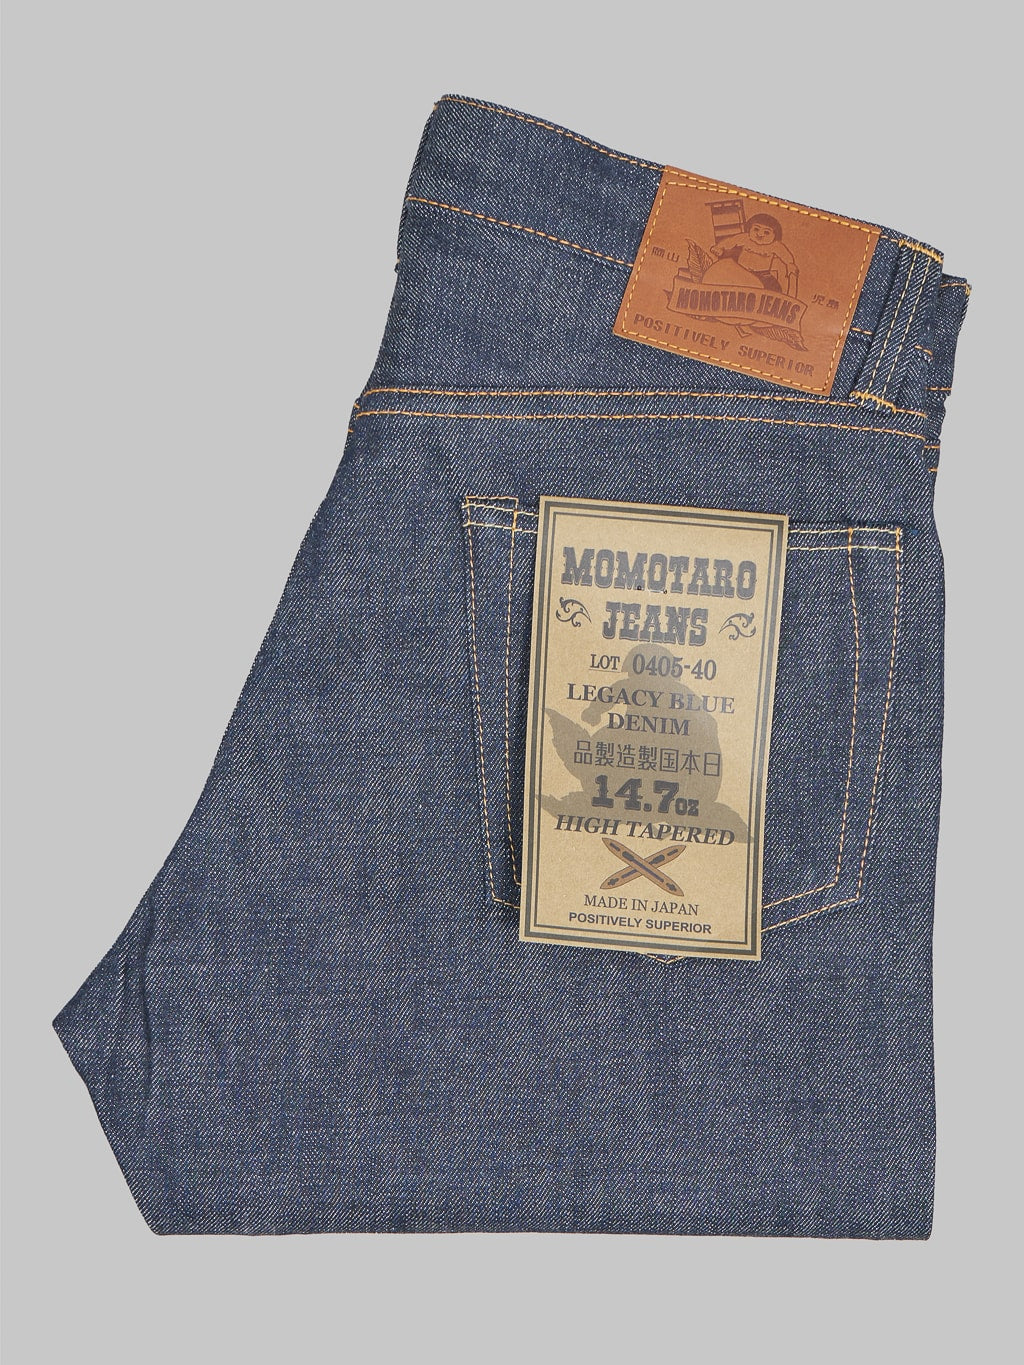 Momotaro legacy blue high tapered jeans made in japan